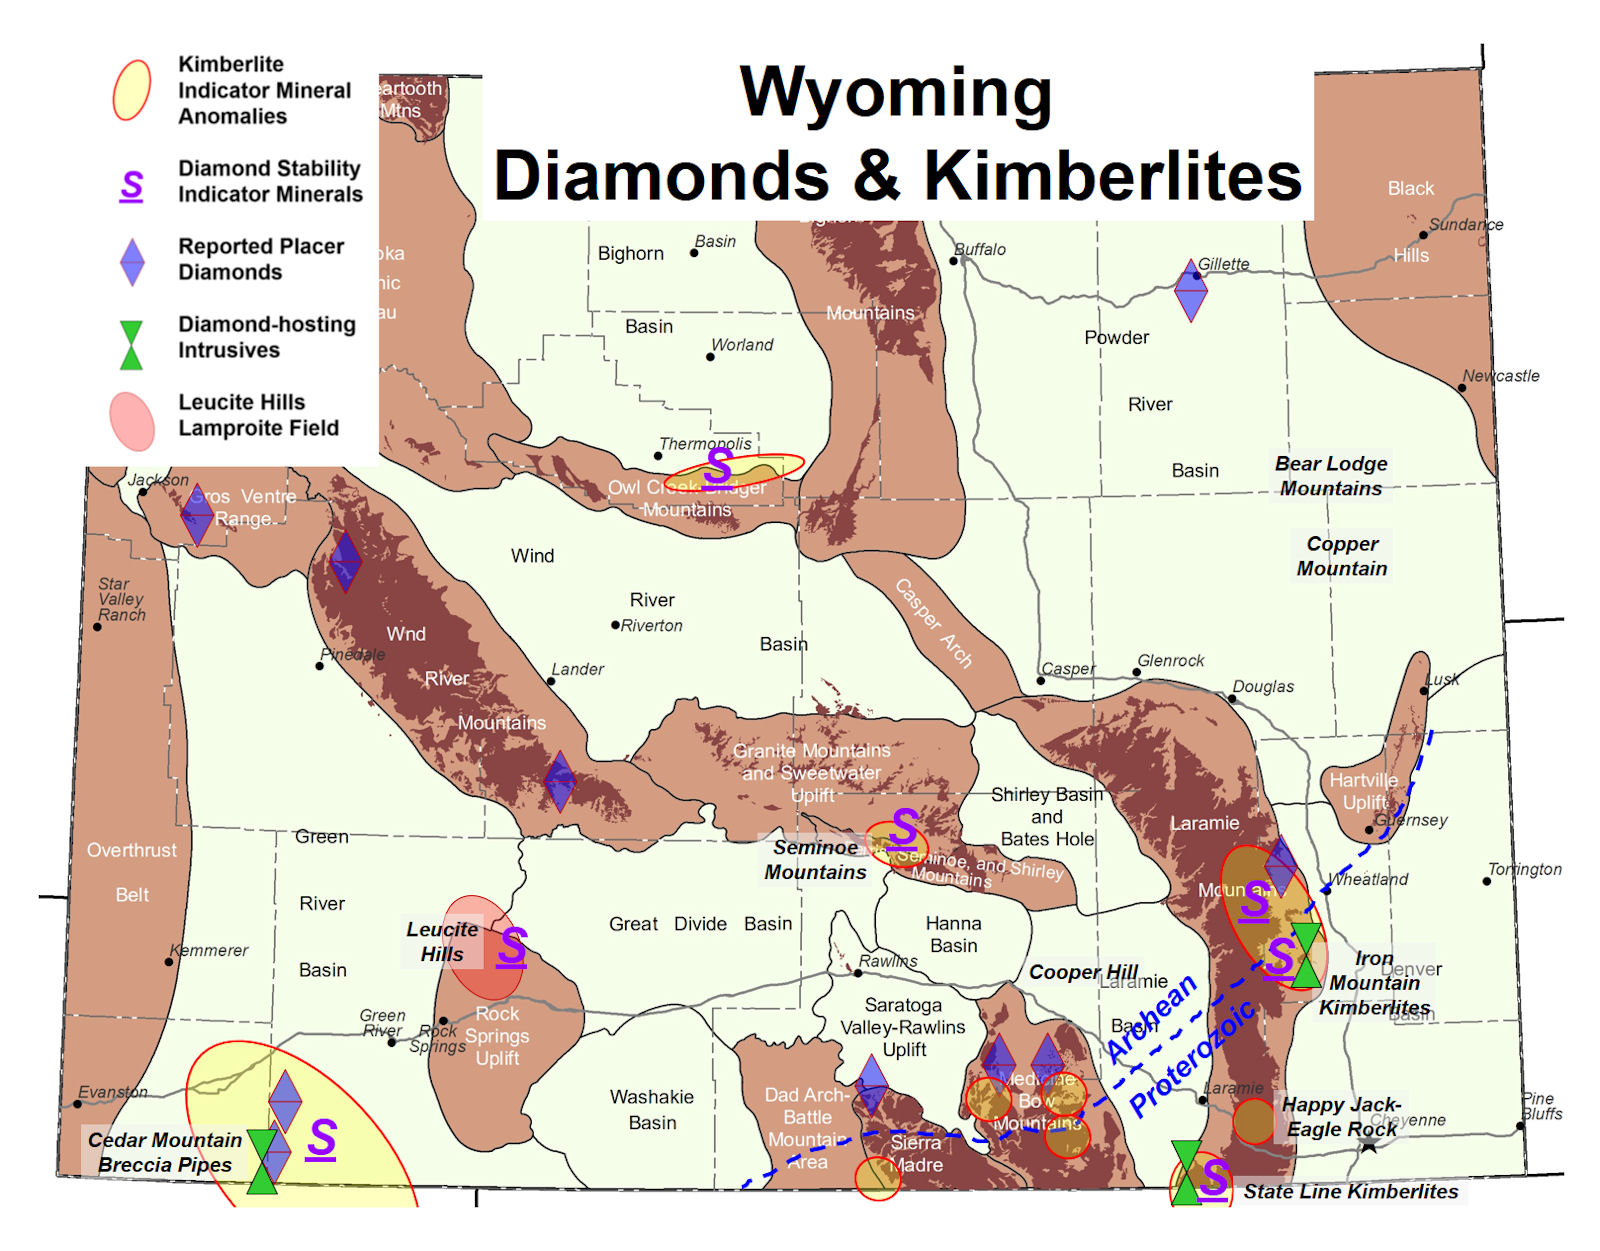 Reported diamonds, indicator minerals, and potential host rocks.